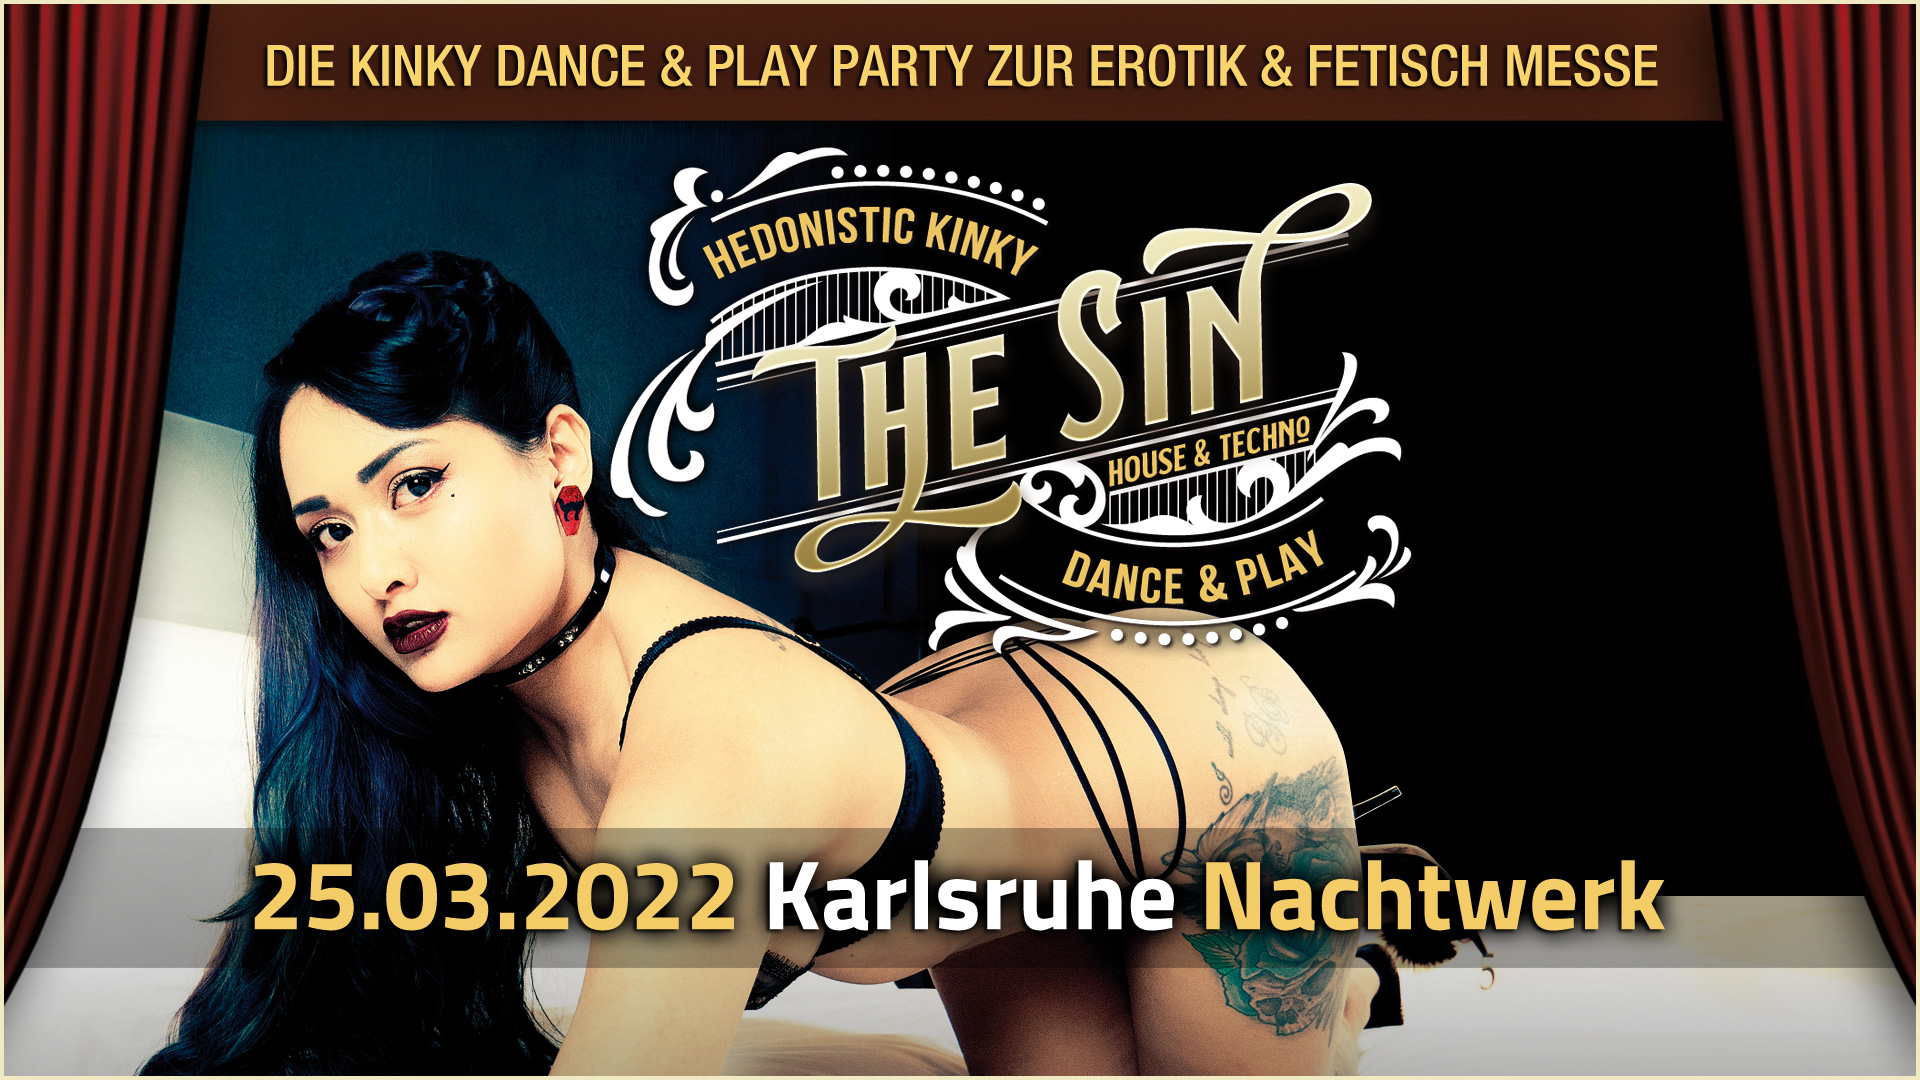 THE SIN » Hedonistic Kinky House & Techno Dance & Play-Party Karlsruhe